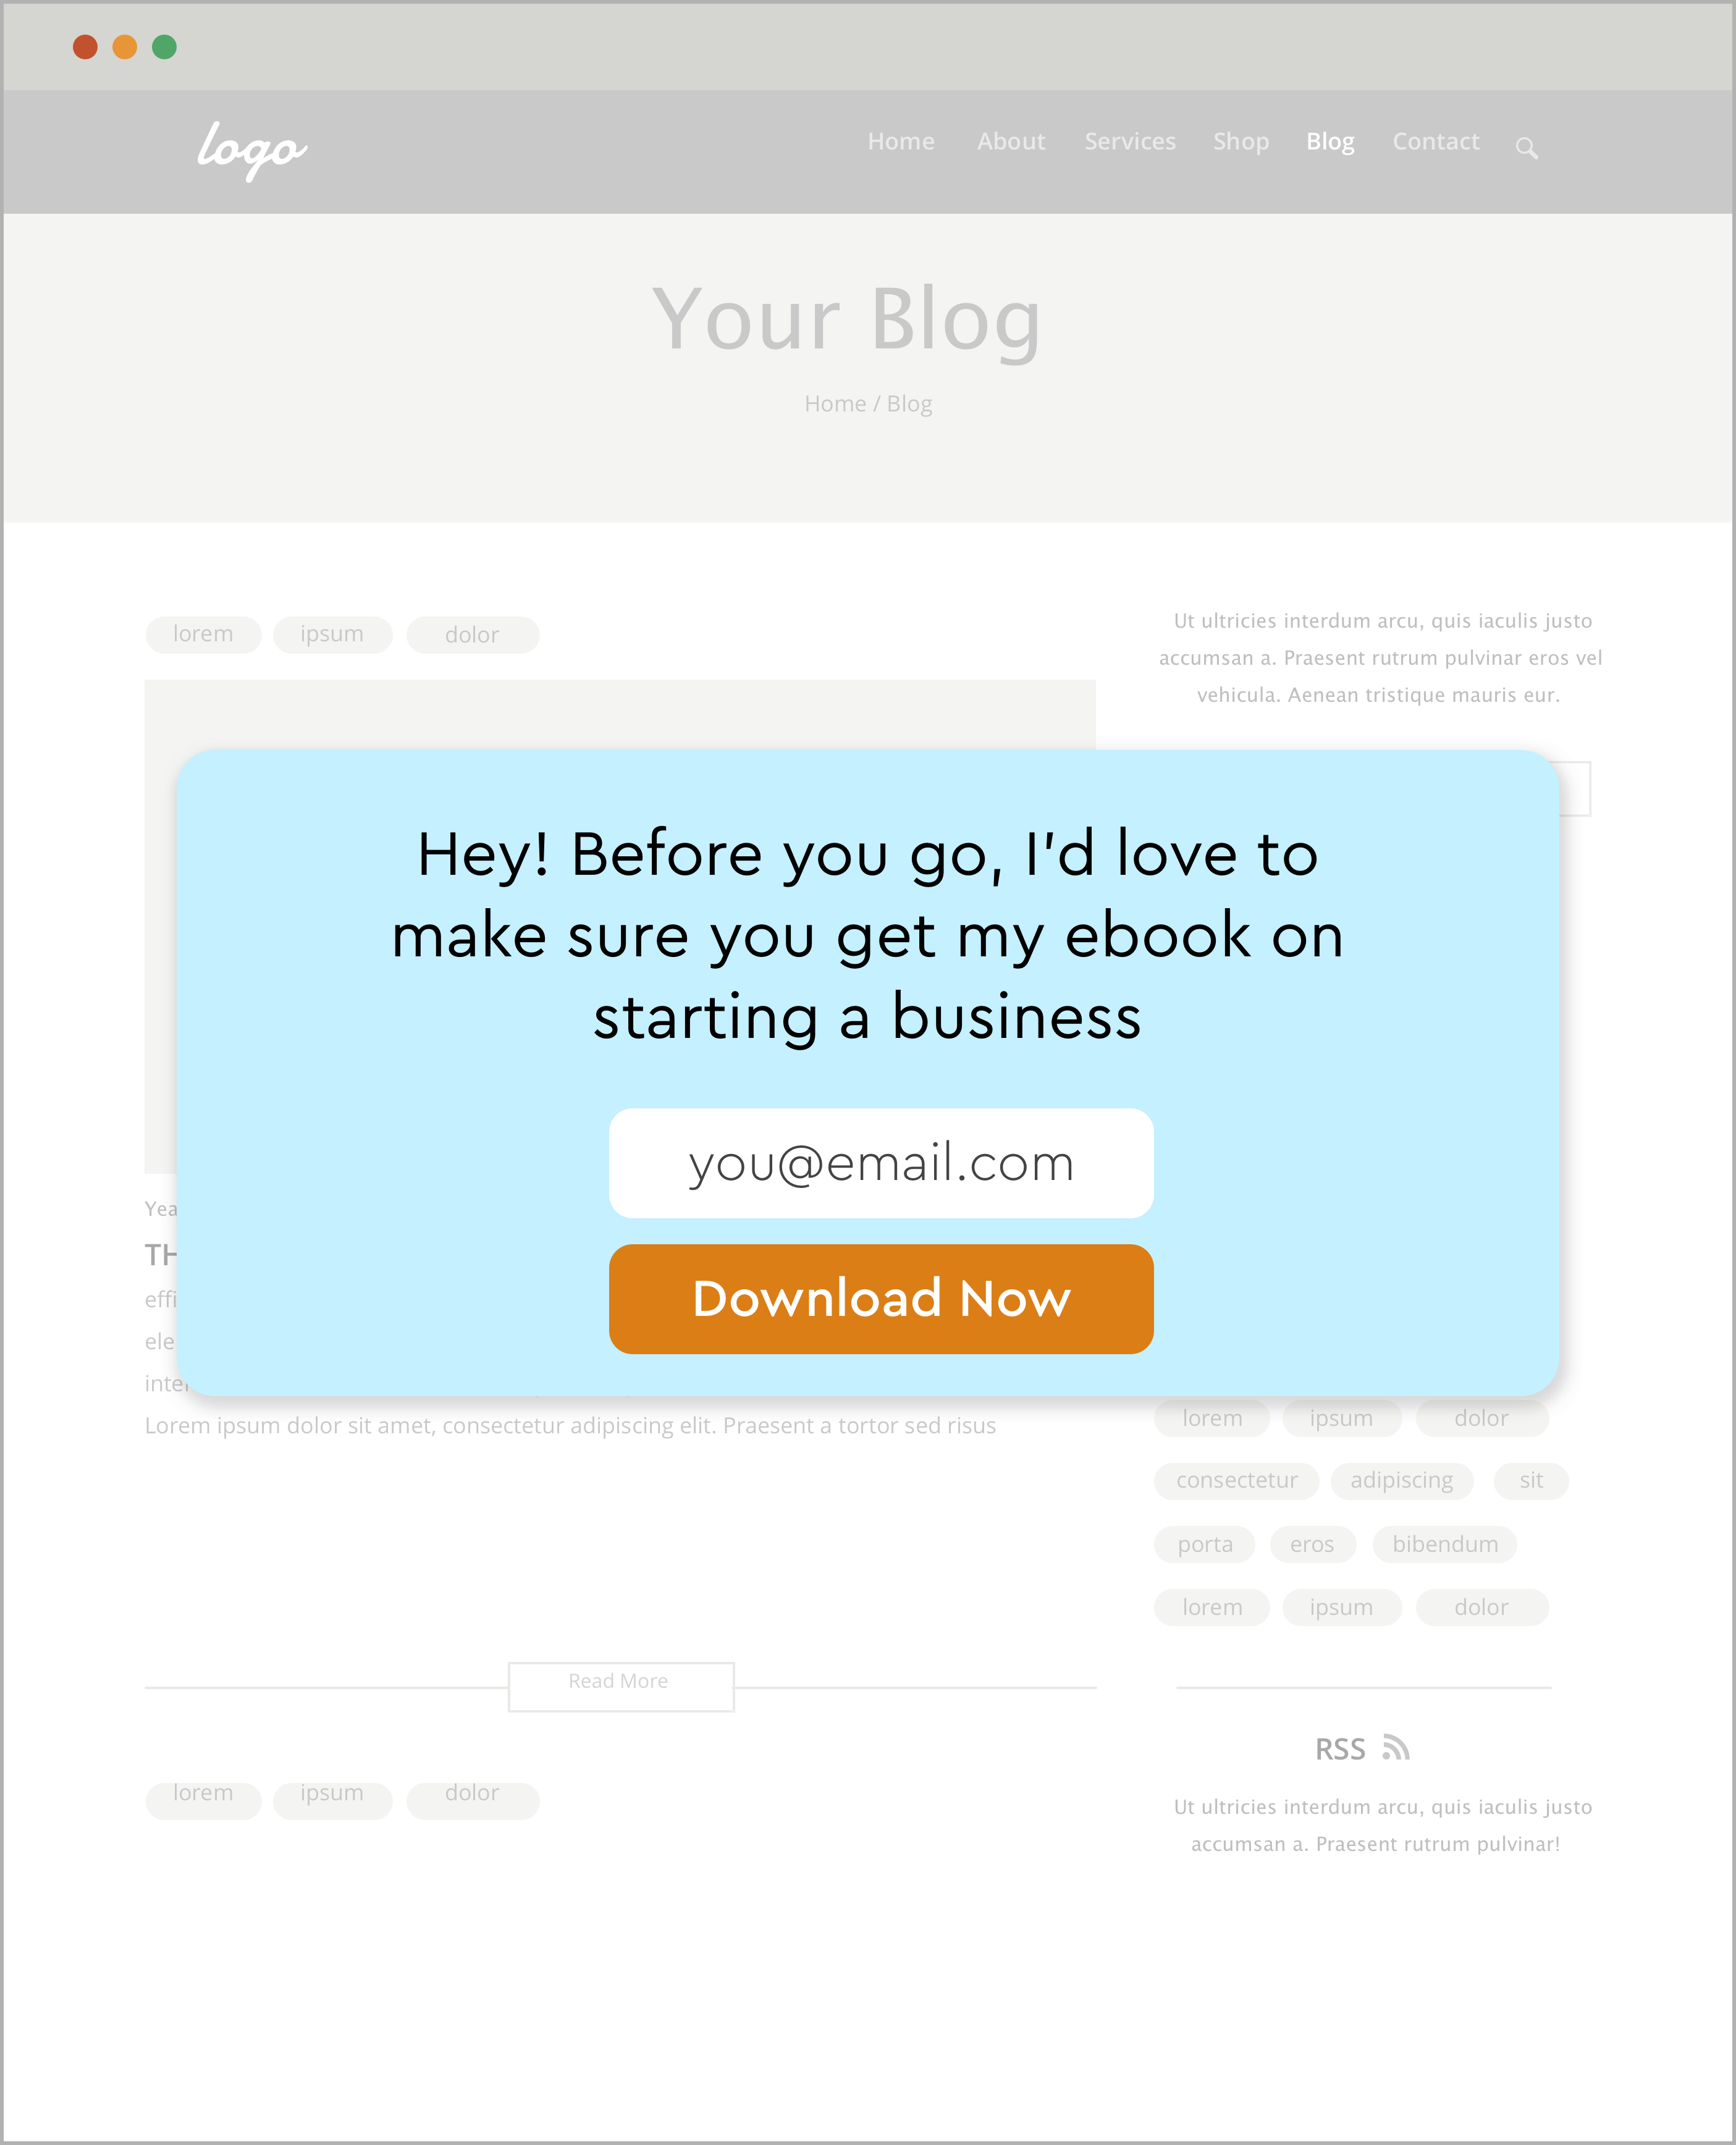 Every opt-in on your website – popups, slide ups, and more – now show your personalized offer